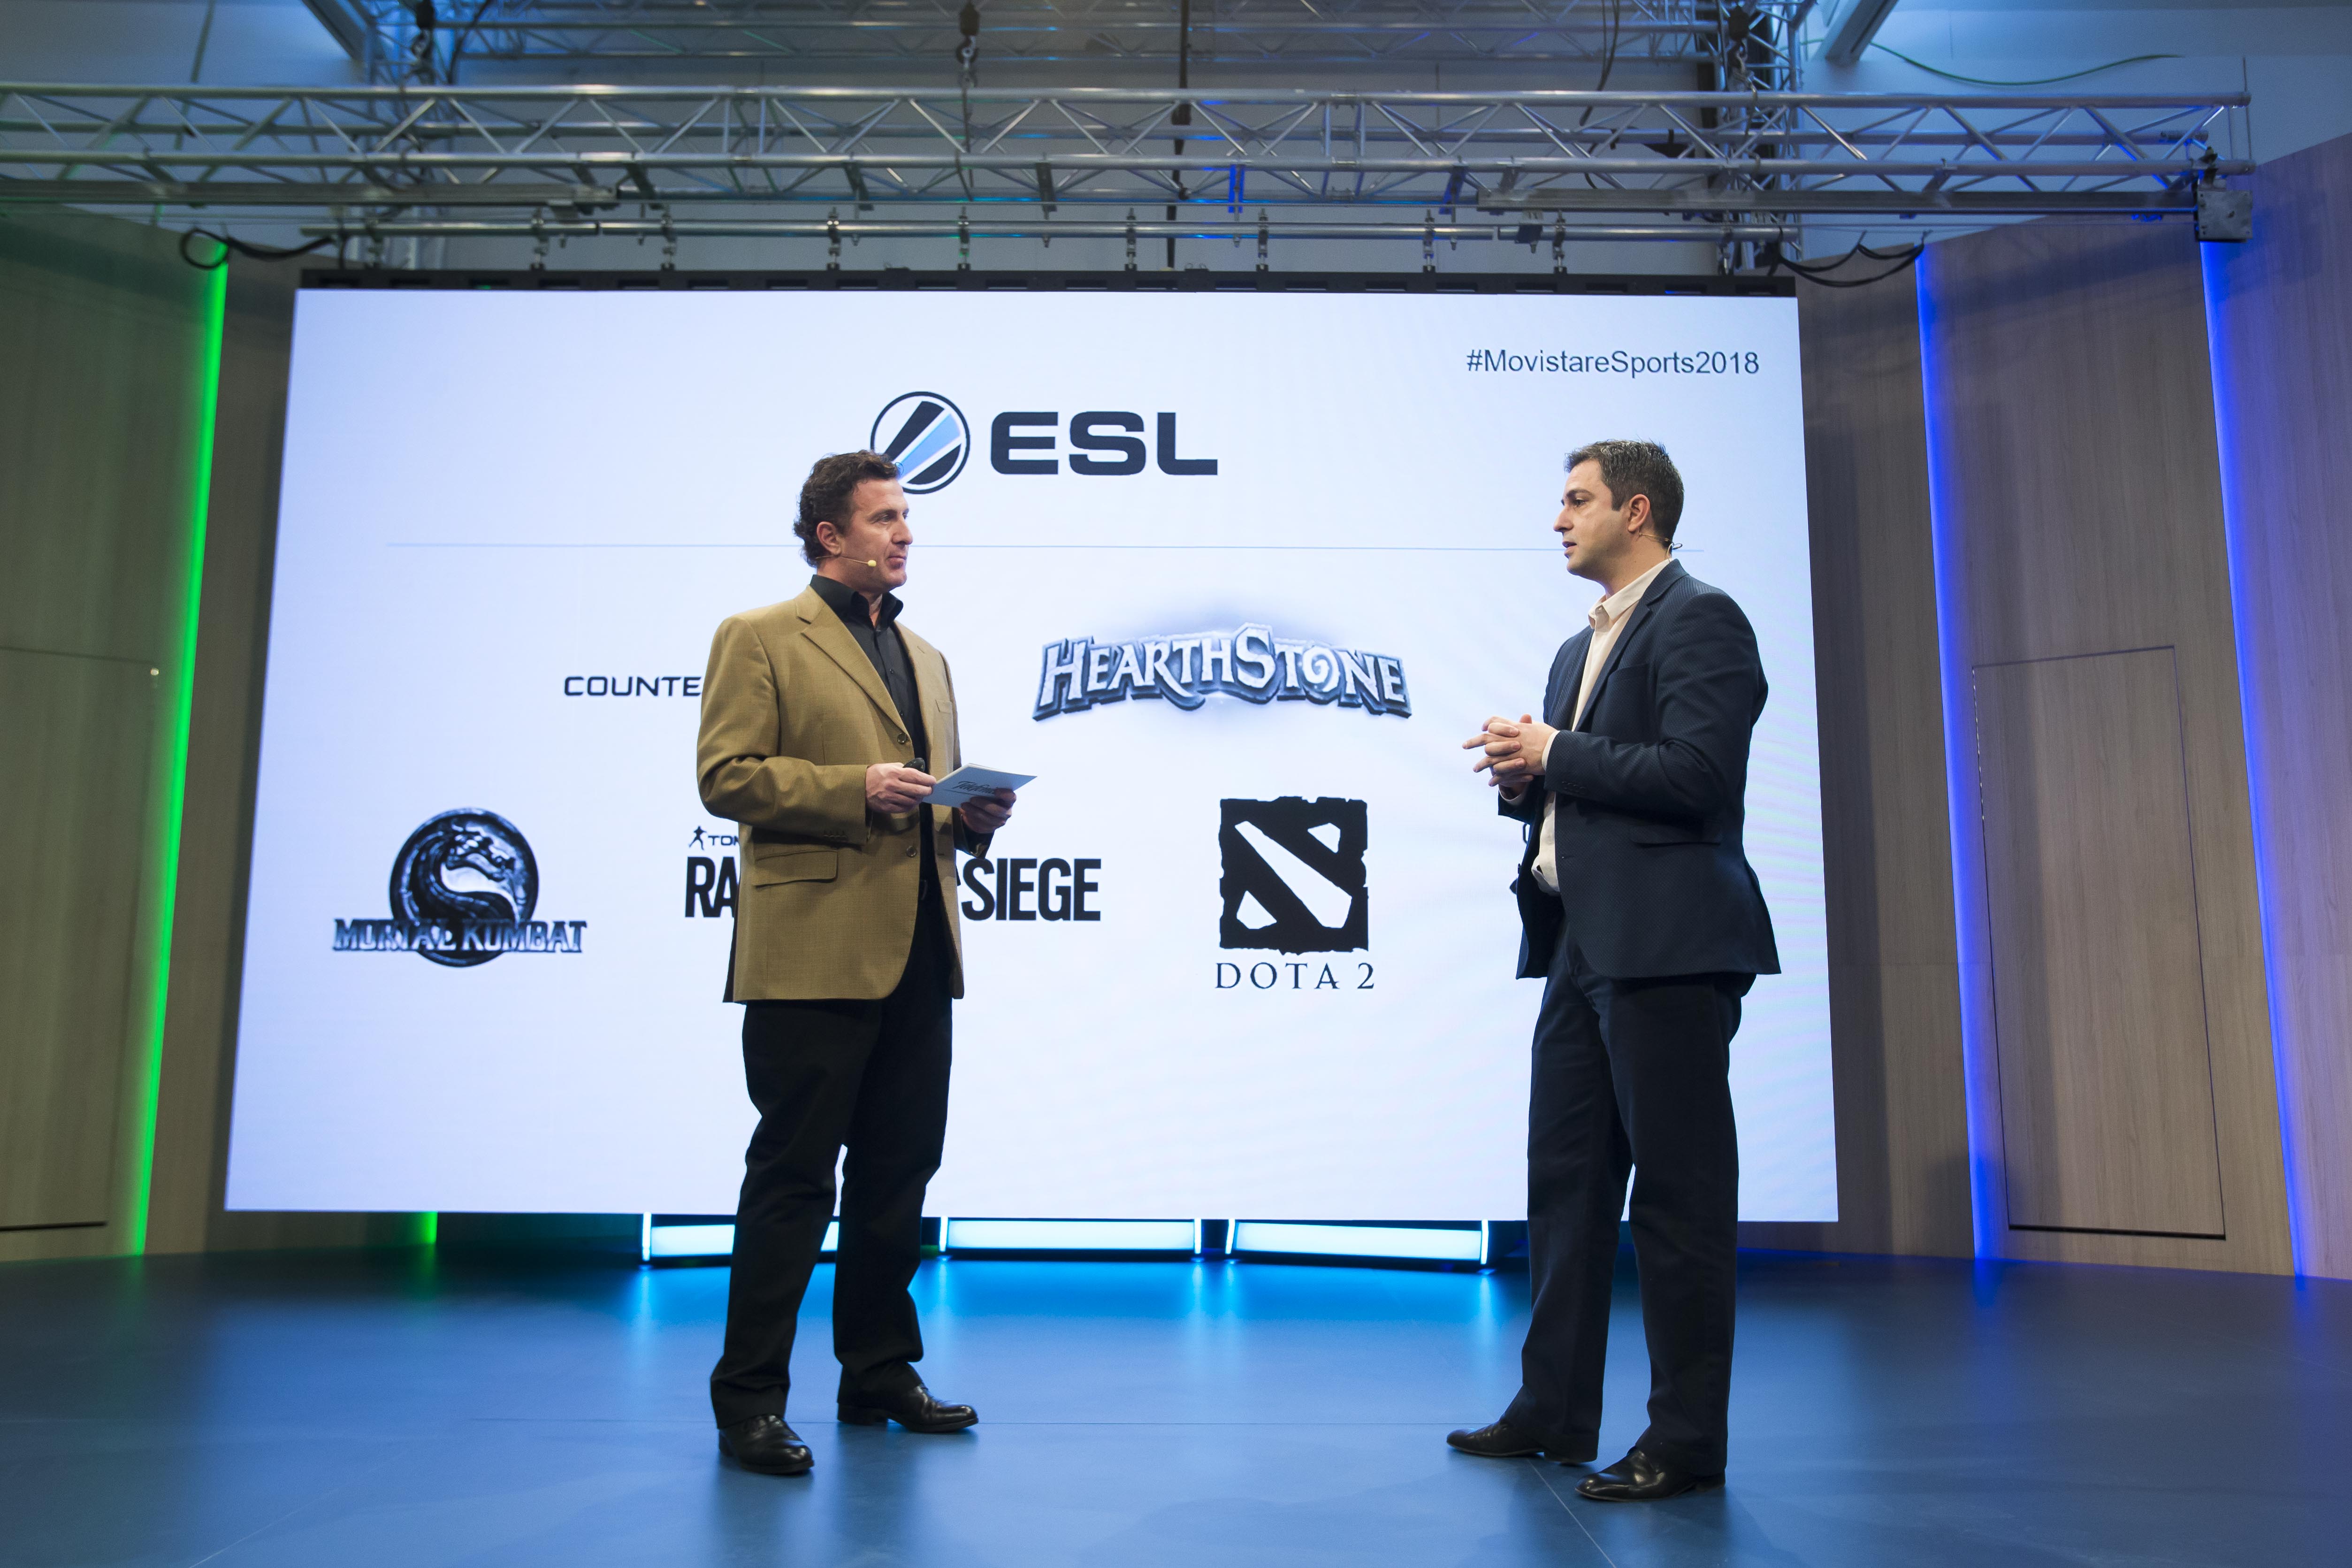 From left to right: Dante Cacciatore, Director of Communications, Brand, and Customer Experience at Telefónica España, and Manuel Moreno, Managing Director Spain & Latam at ESL